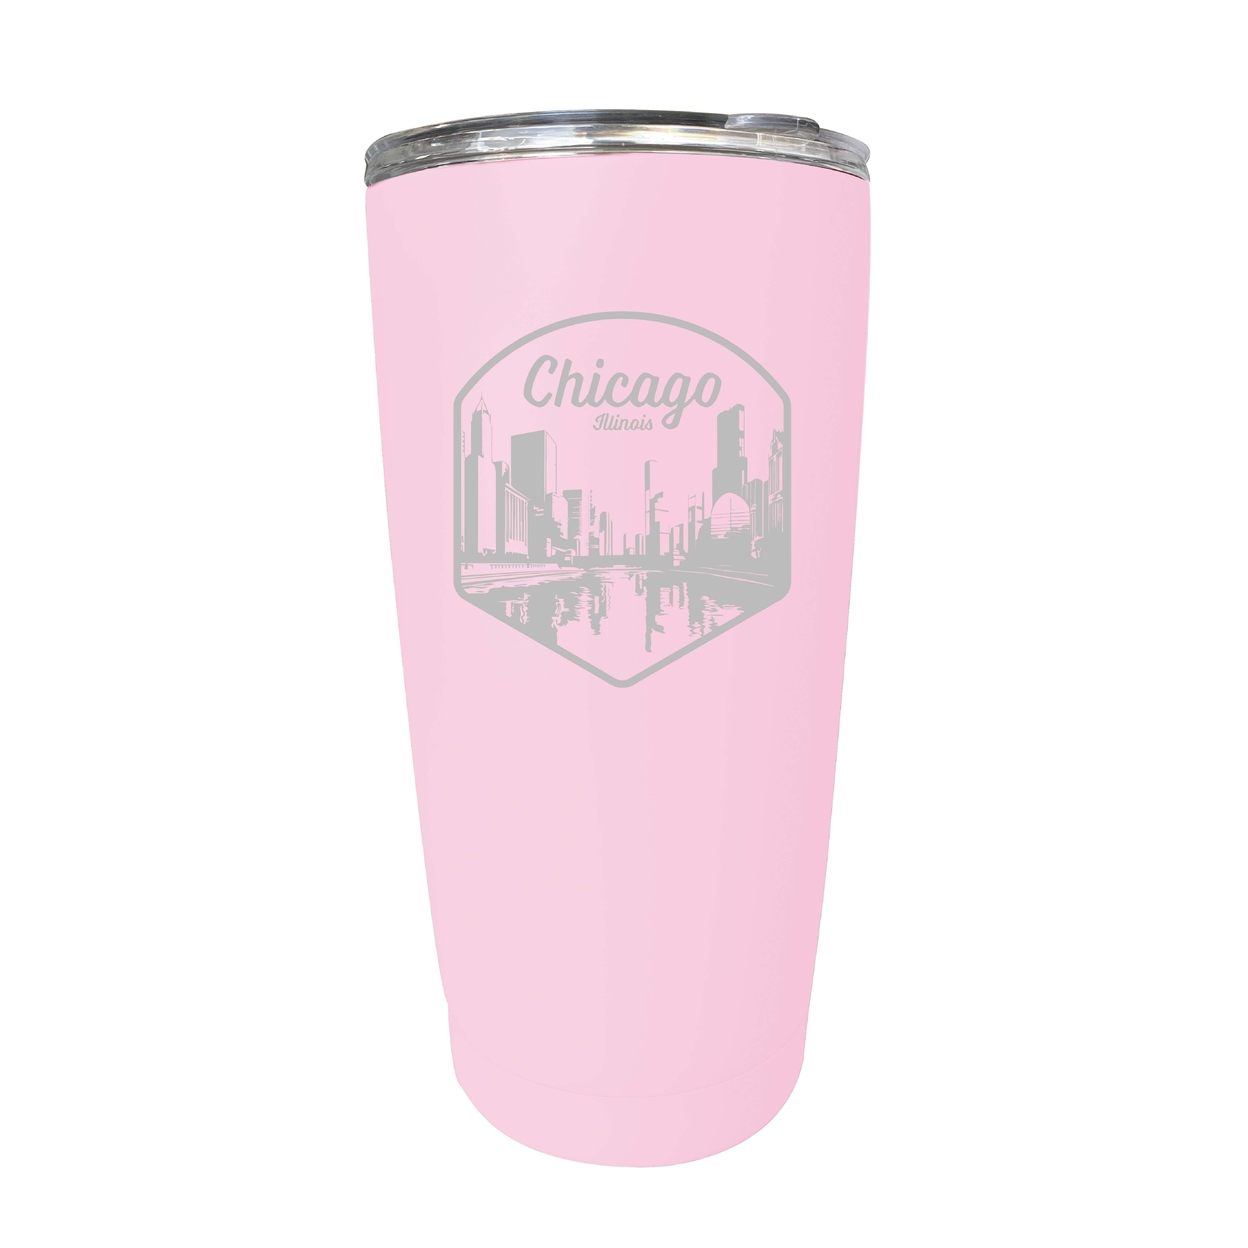 Chicago Illinois Souvenir 16 Oz Engraved Insulated Tumbler - Pink,,2-Pack